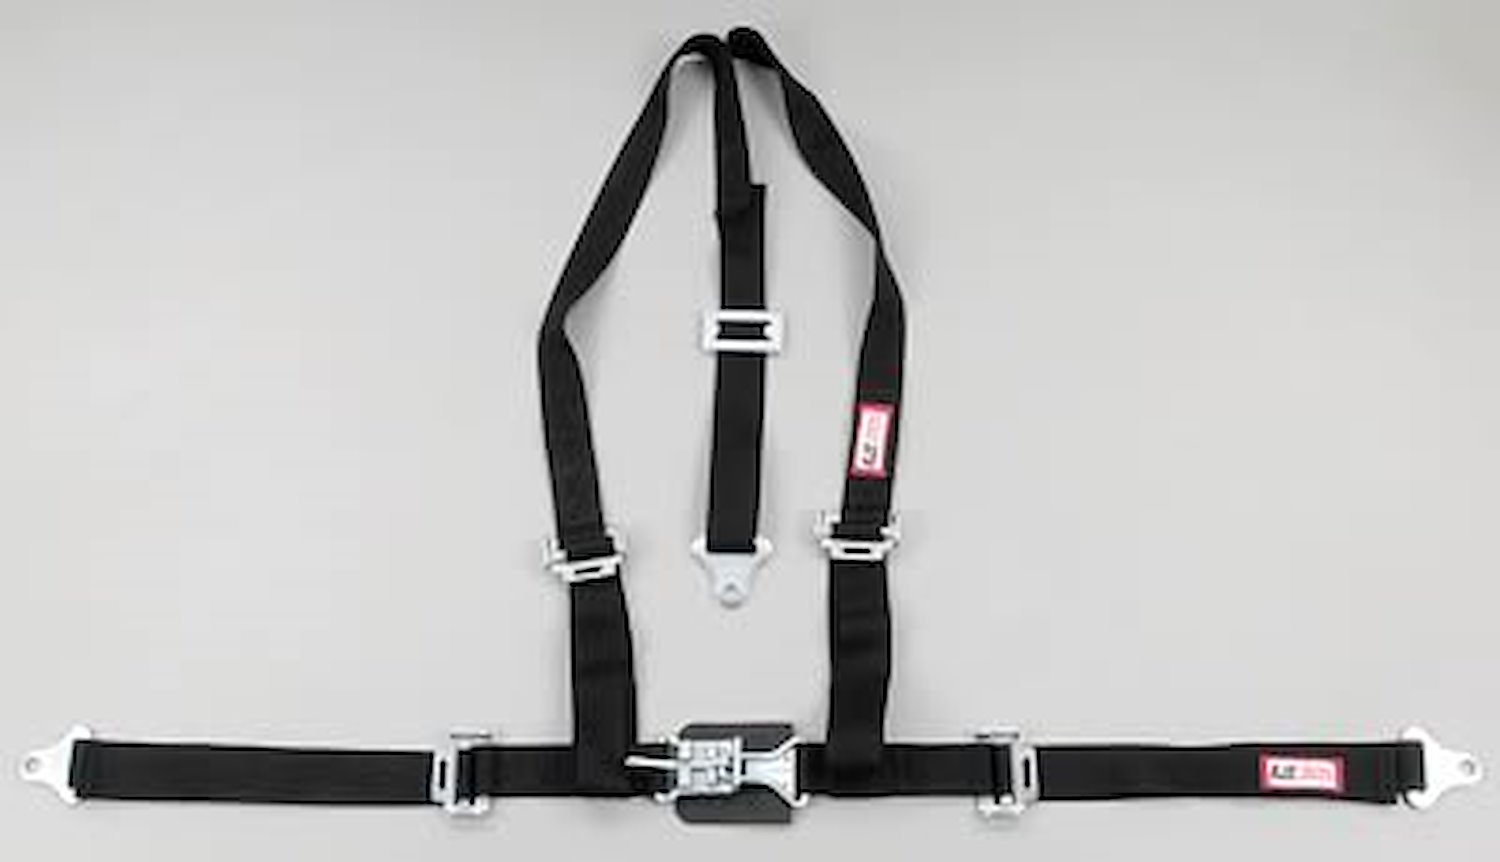 NON-SFI L&L HARNESS 2 PULL UP Lap Belt SEWN IN 2 S.H. V ROLL BAR Mount w/STERNUM STRAP ALL WRAP ENDS RED